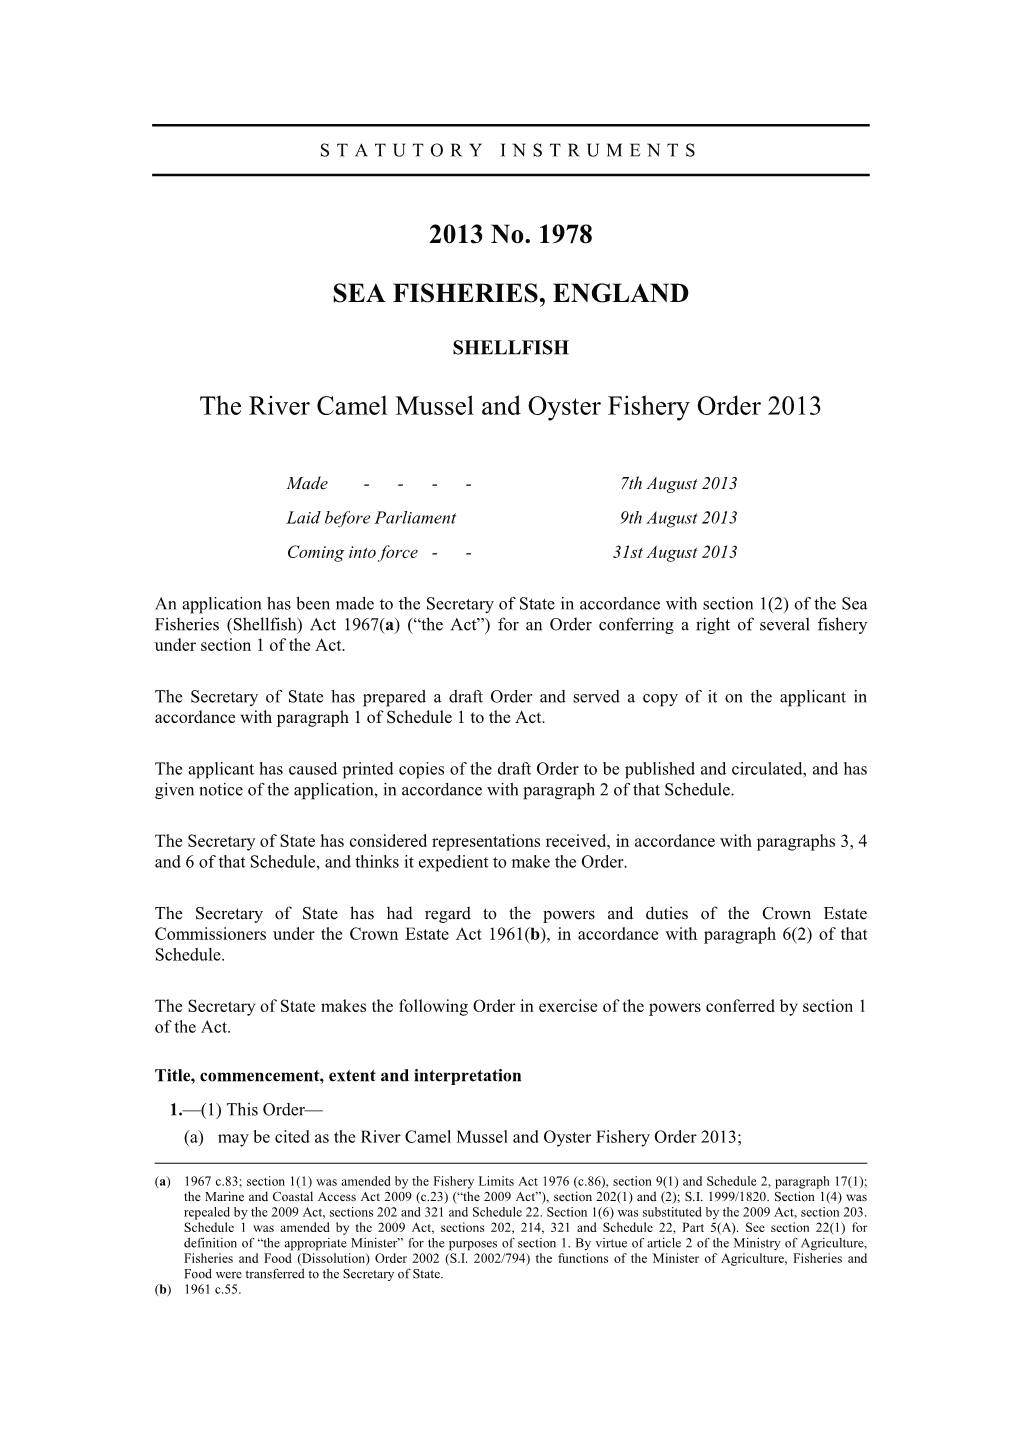 River Camel Mussel and Oyster Fishery Order 2013